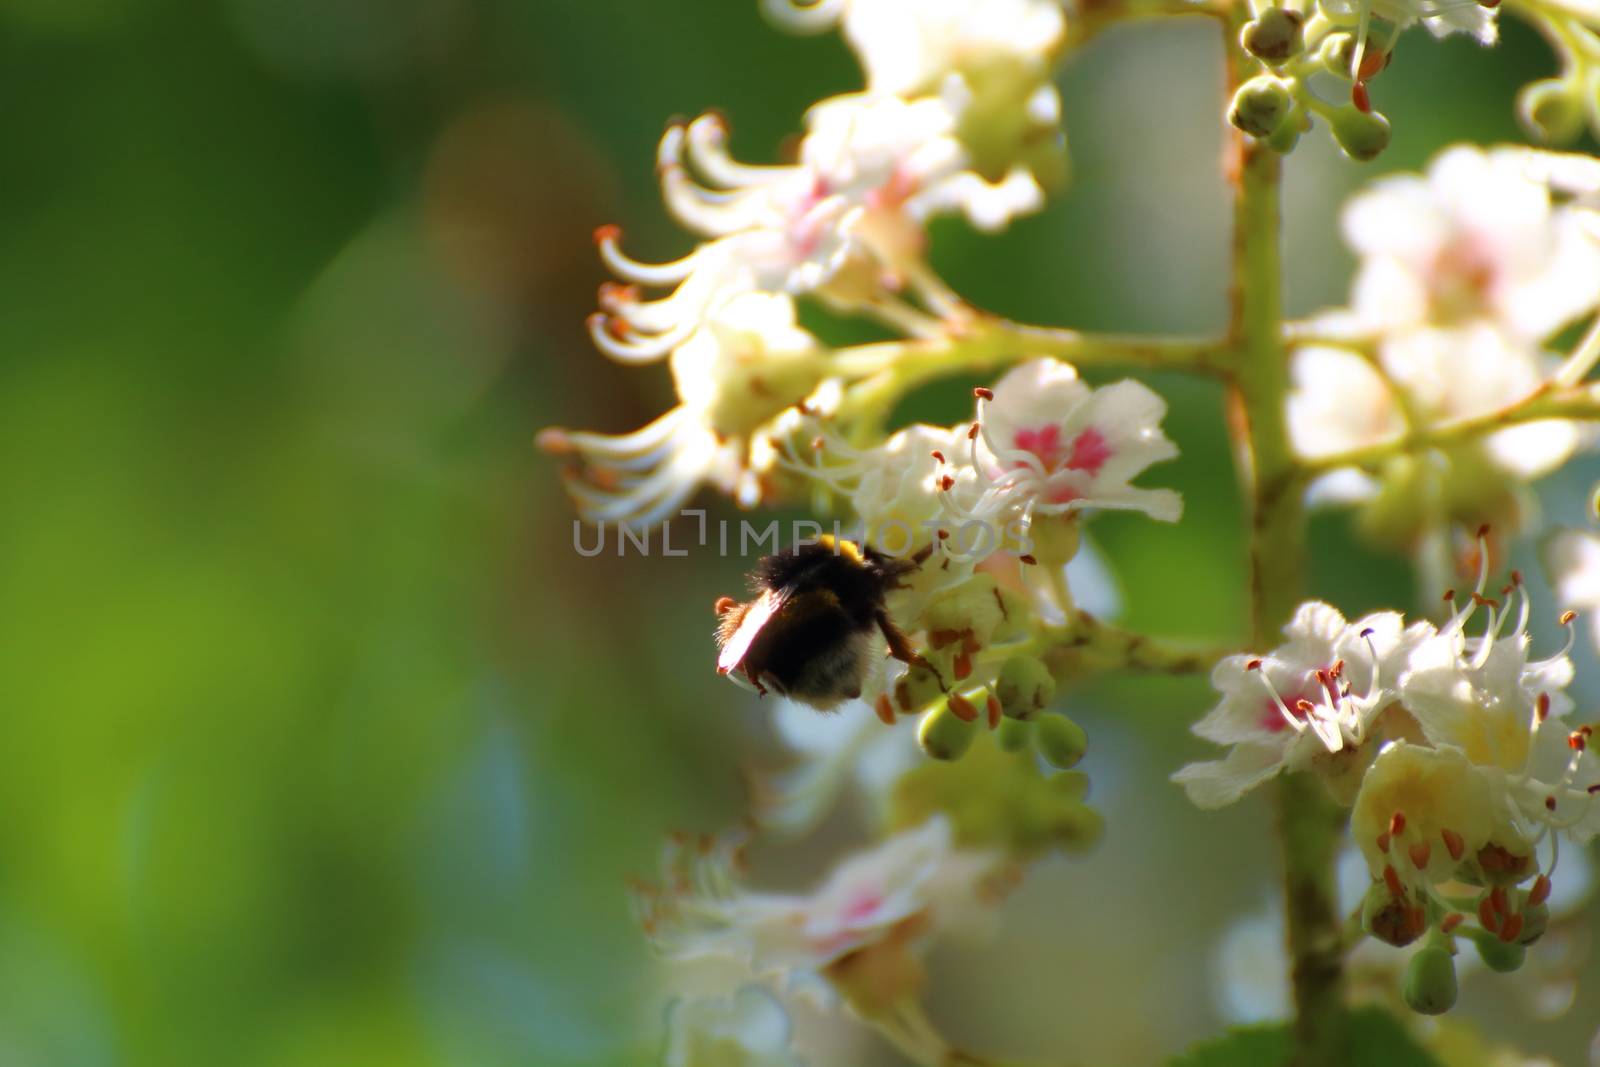 bumblebee pollinates white plum flowers in the countryside by riccardofe